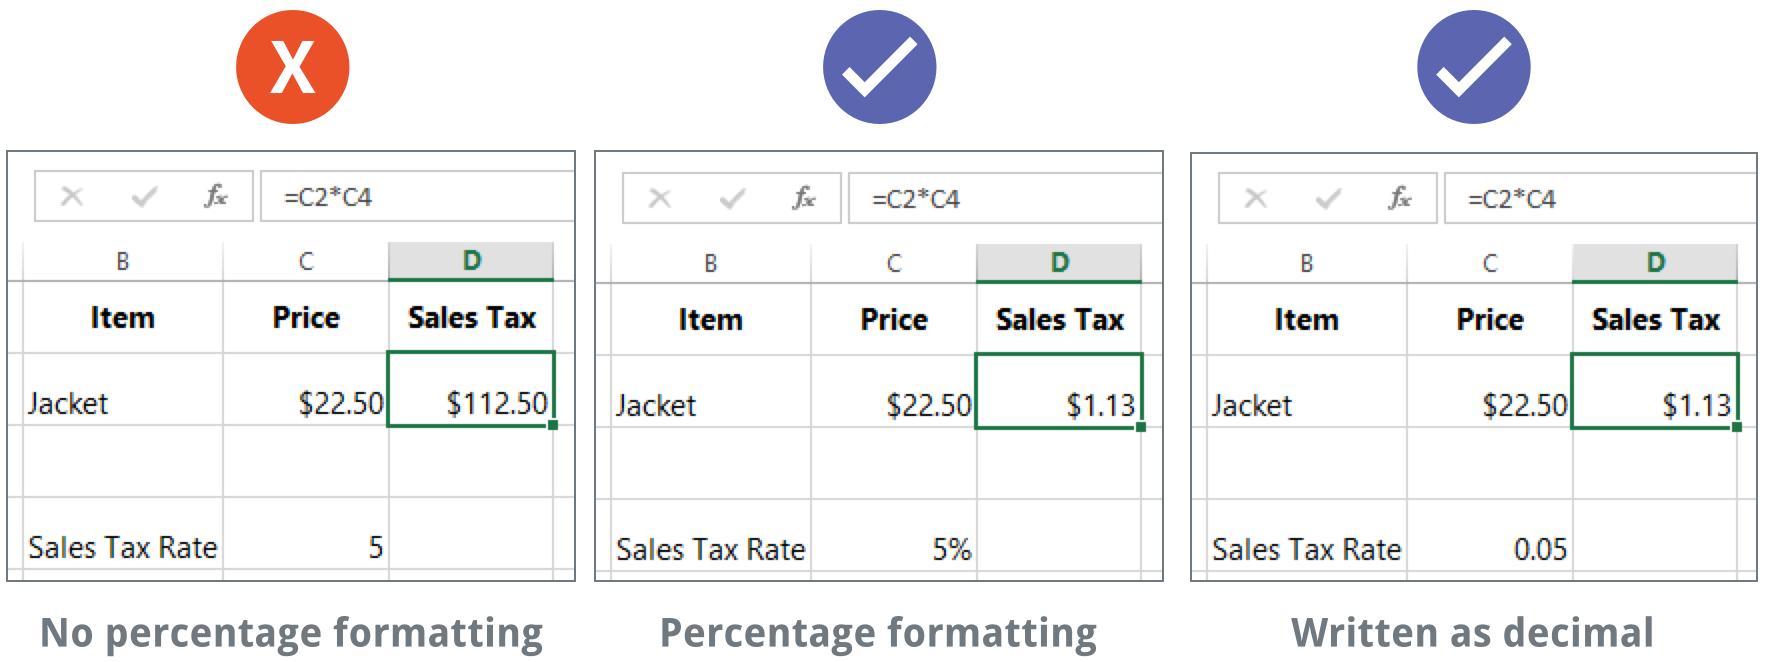 image showing correct and incorrect calculations based on percentage formatting